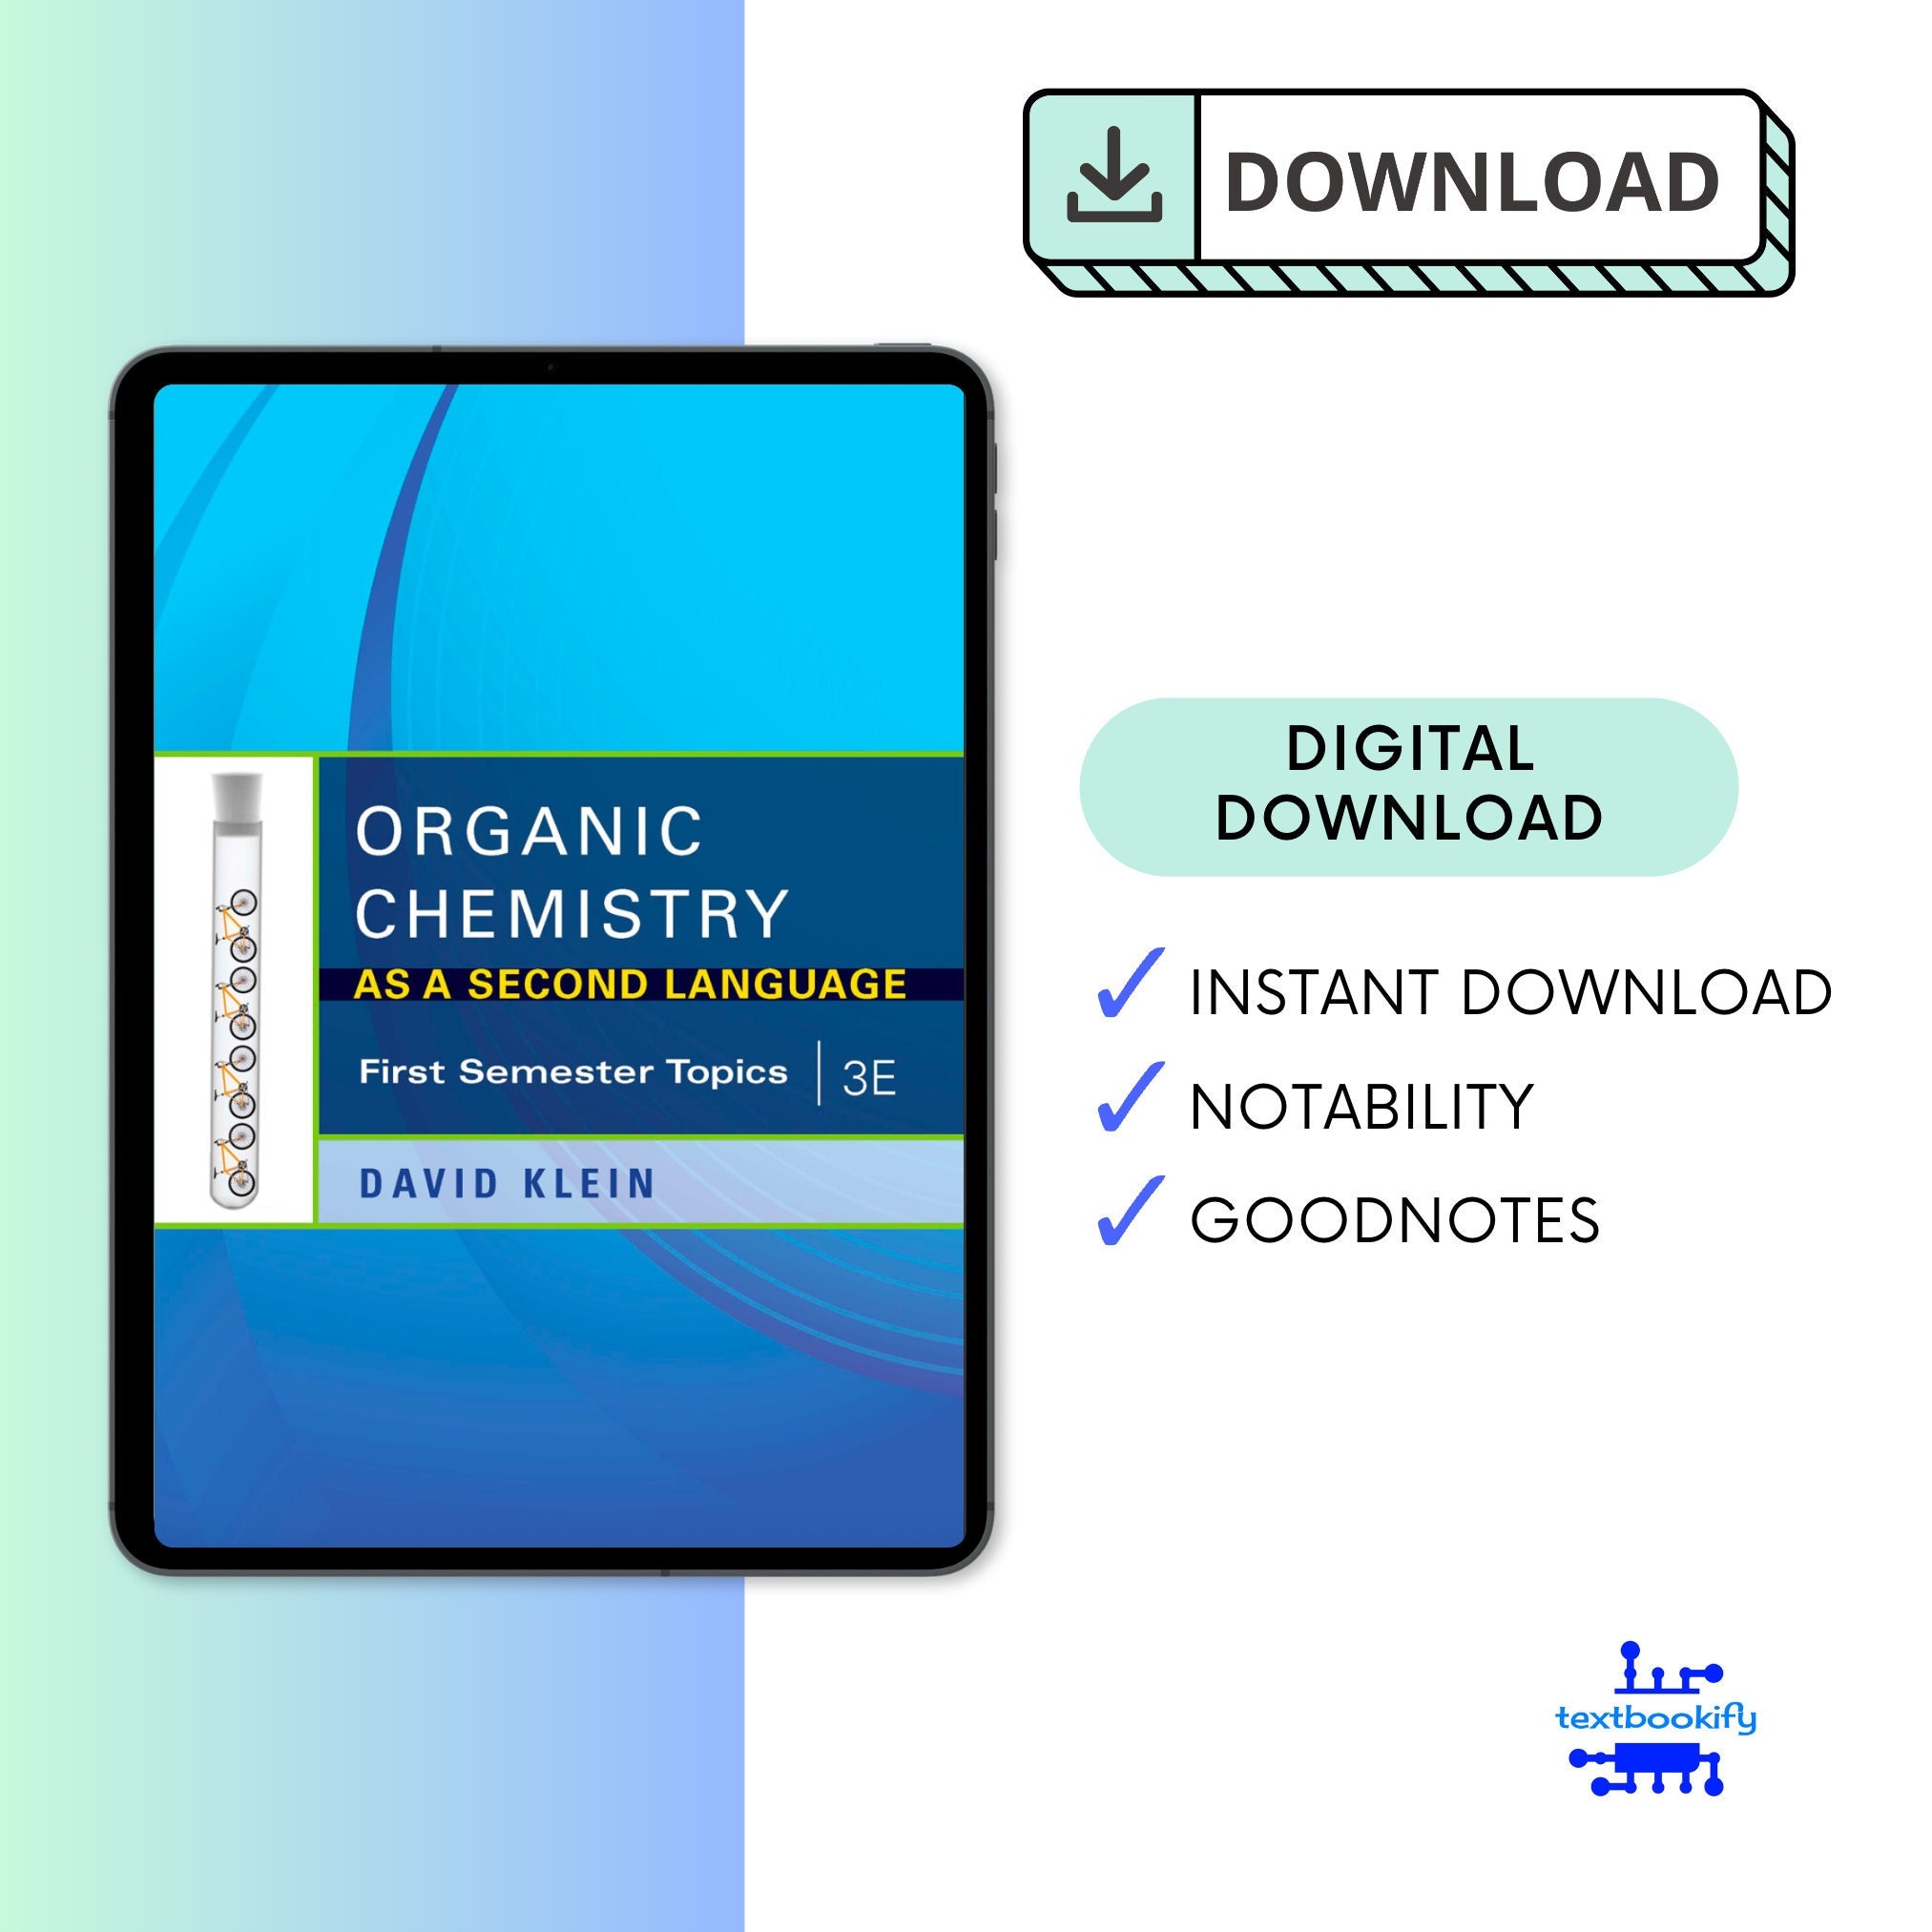 Digital　Organic　Language　Chemistry　as　a　Second　Download　Etsy